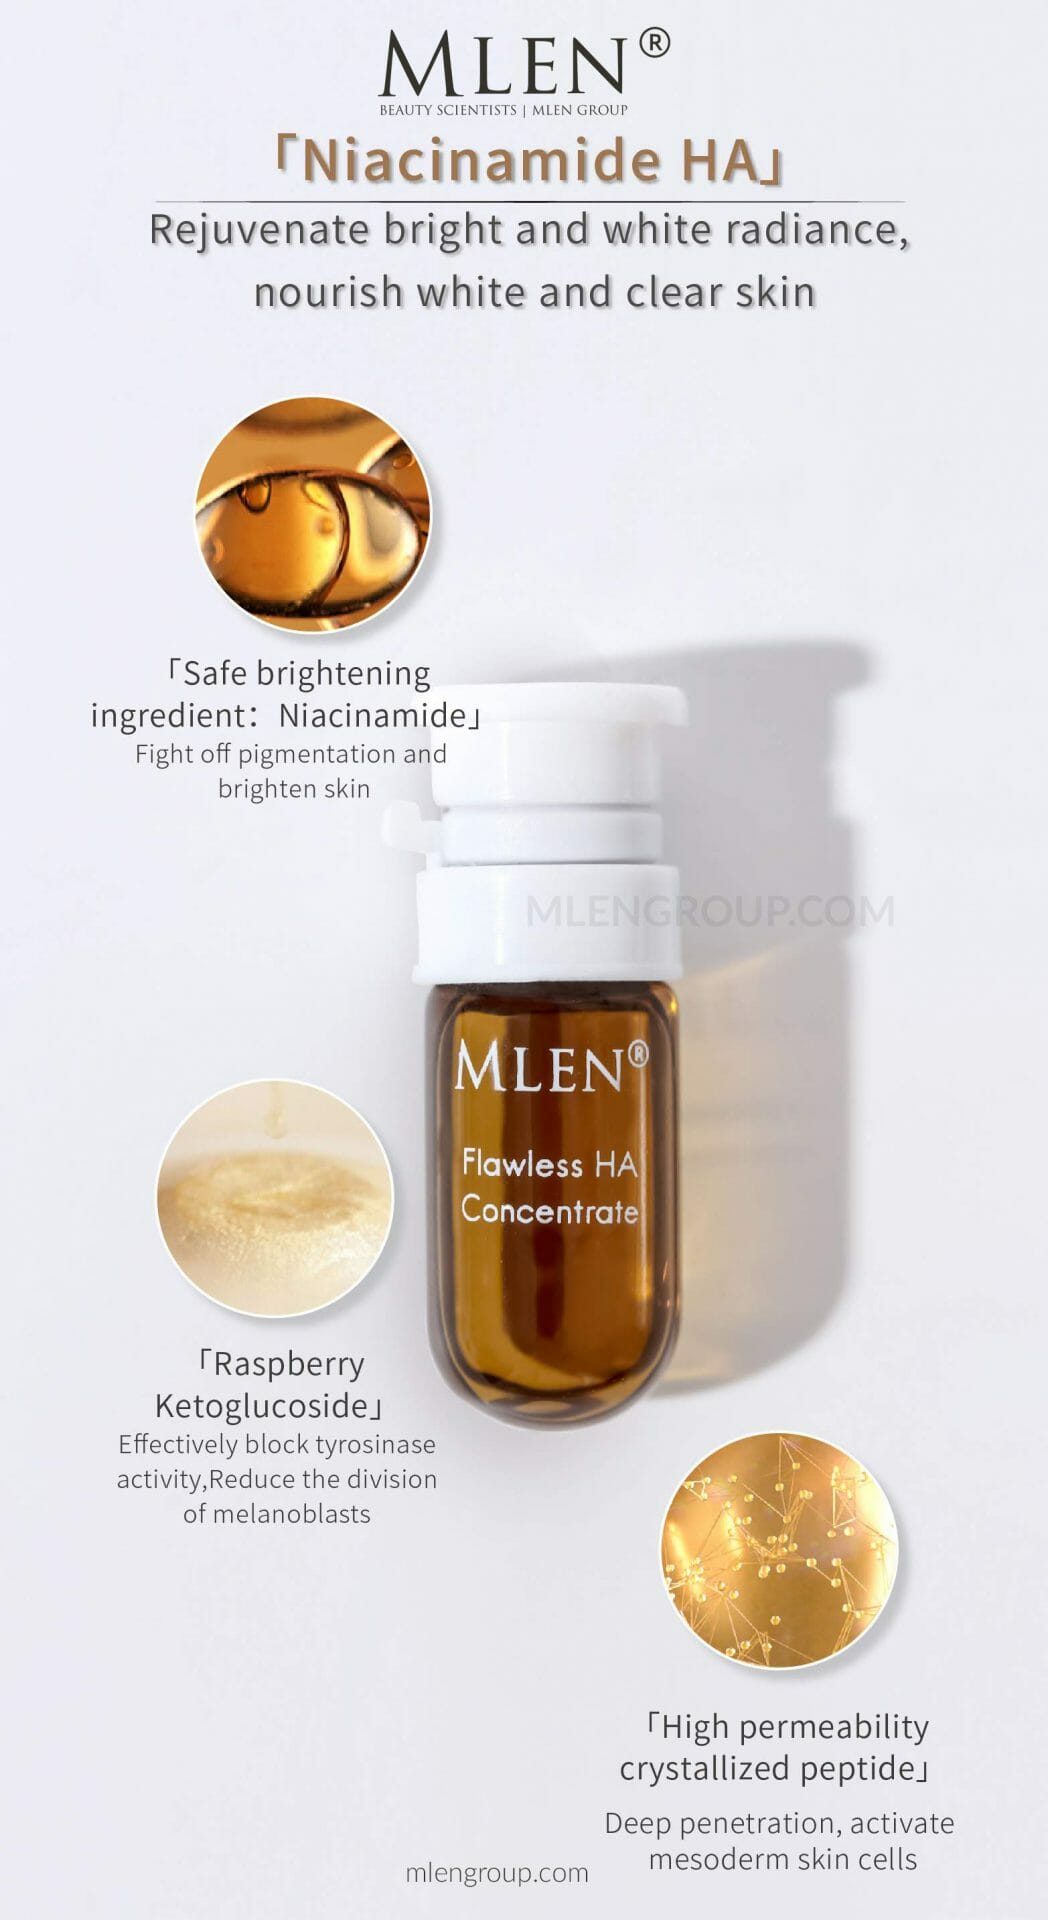 mlen group mlen flawless ha concentrate 07